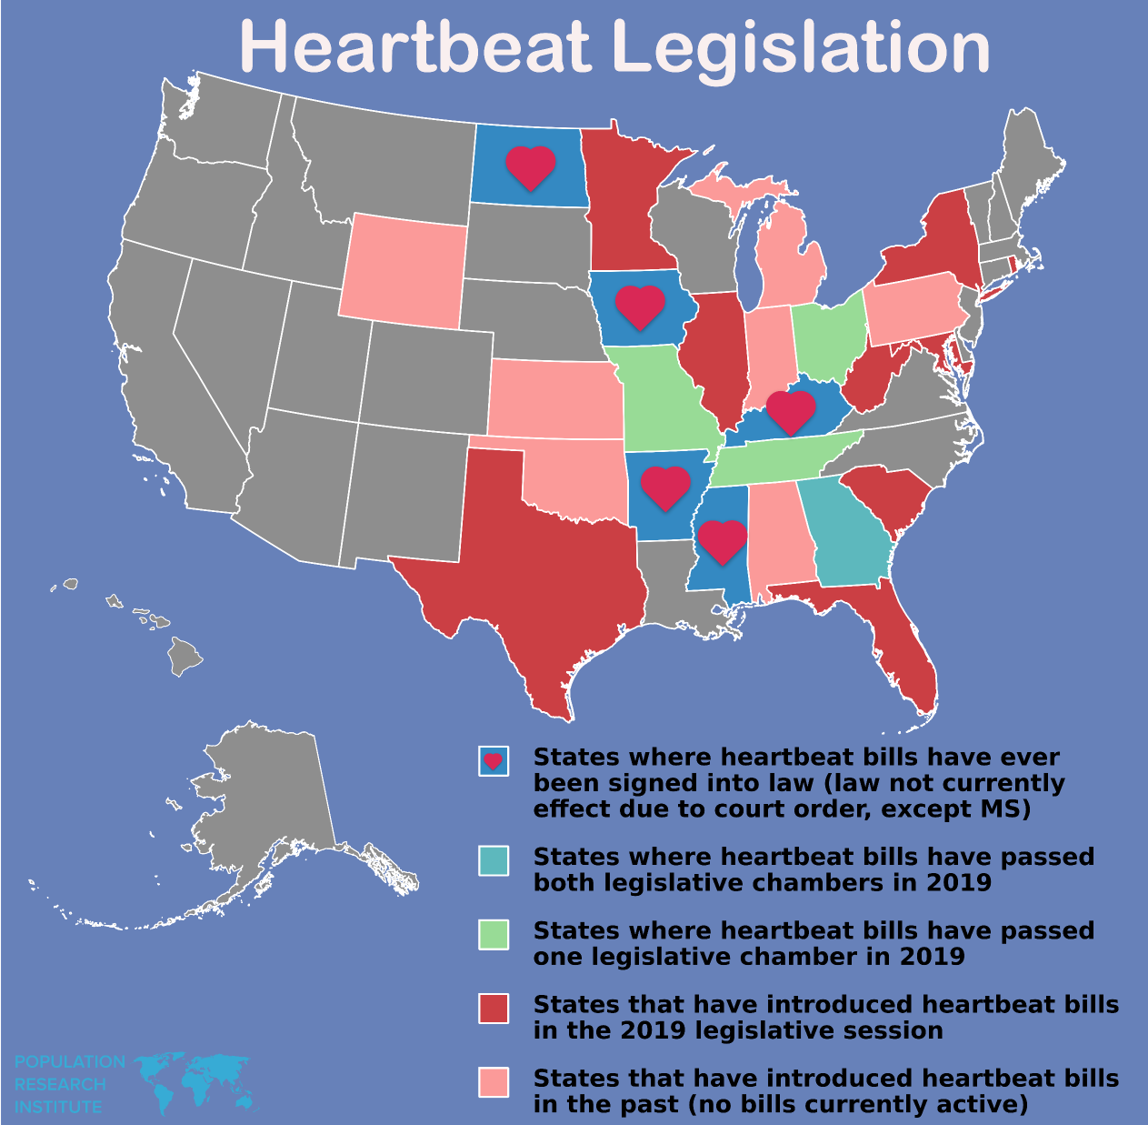 Heartbeat Bills Gaining Momentum, Could They Prompt Overturn Roe vs Wade?